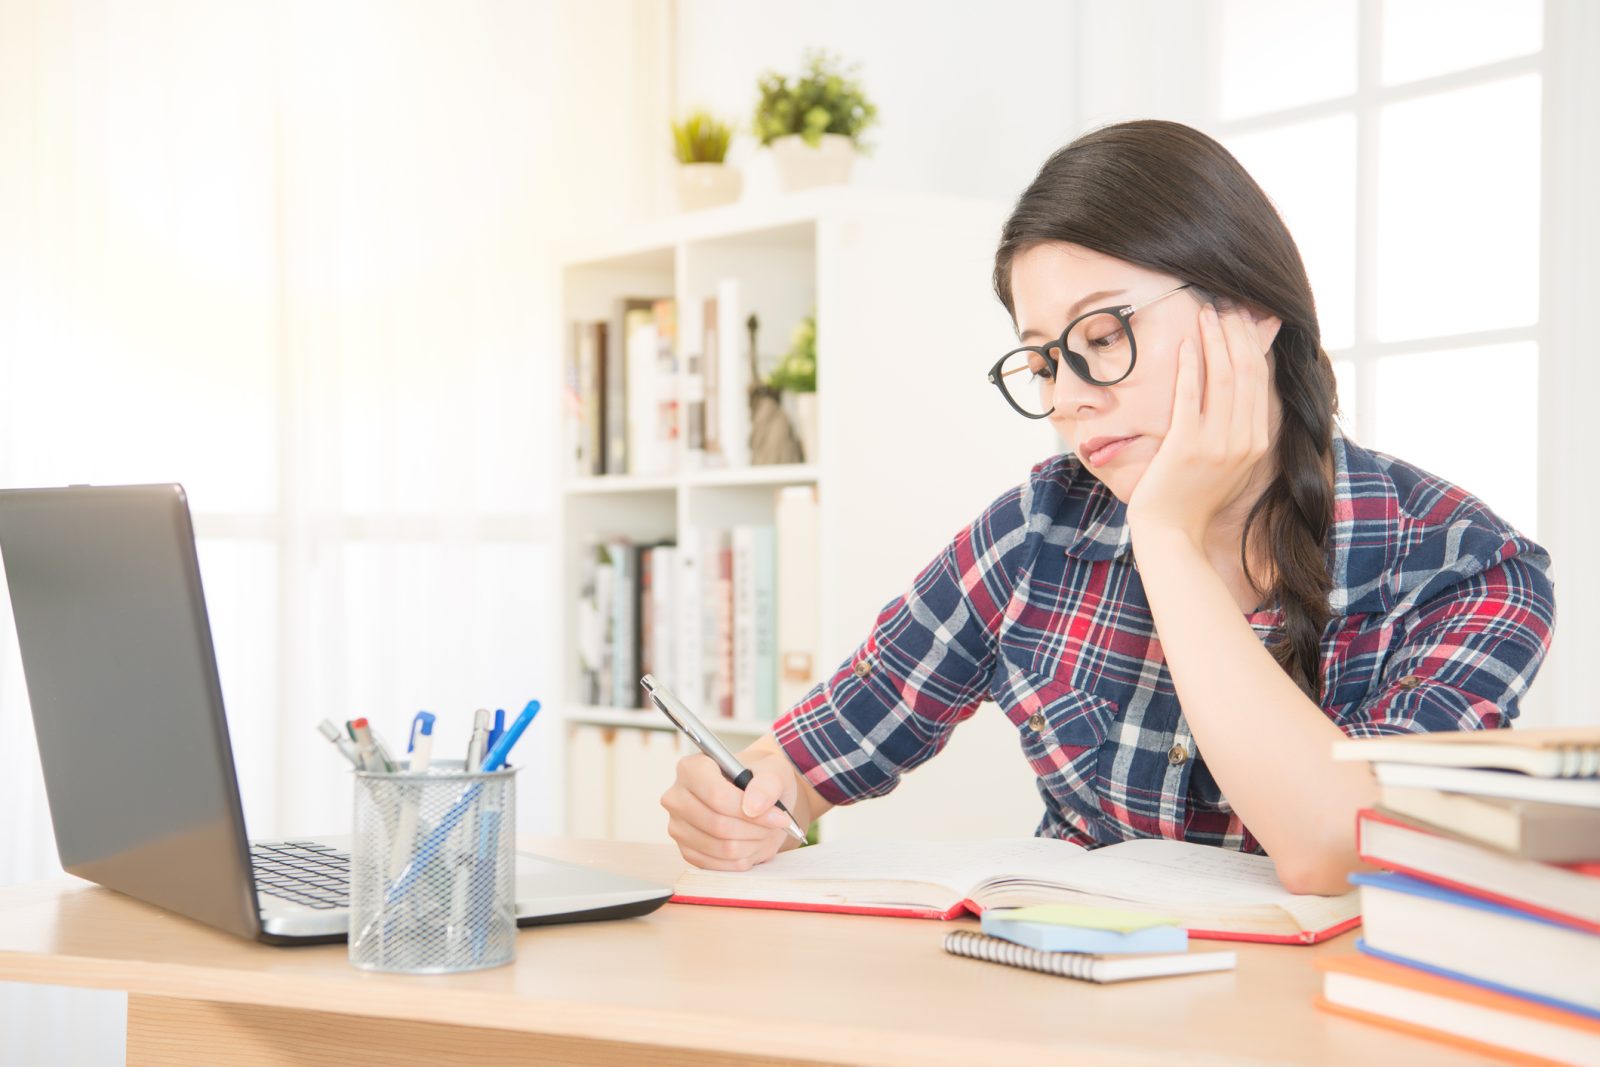 4 Tips to Make Any College Essay Stand Out